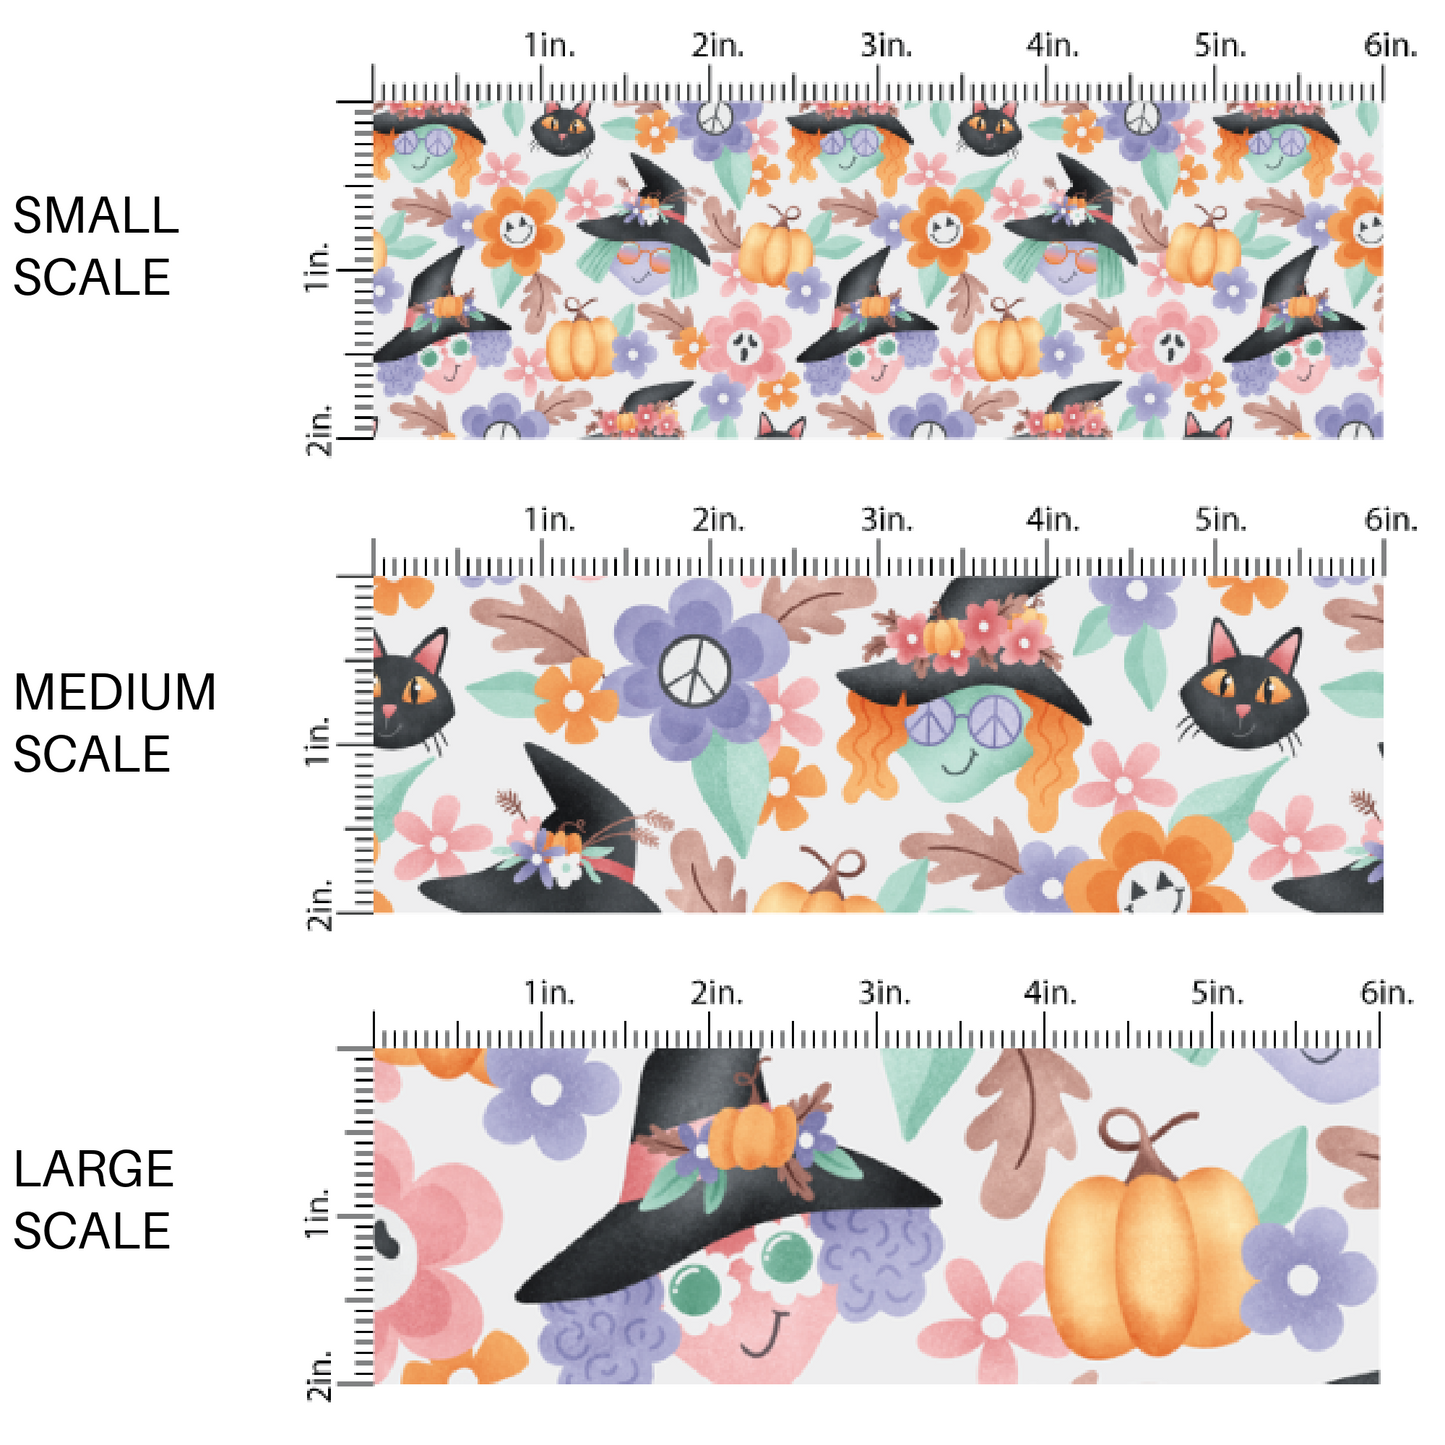 This scale chart of small scale, medium scale, and large scale of these Halloween themed cream fabric by the yard features witches, hats, black cats, small daisies, and pumpkins on cream. This fun spooky themed fabric can be used for all your sewing and crafting needs!